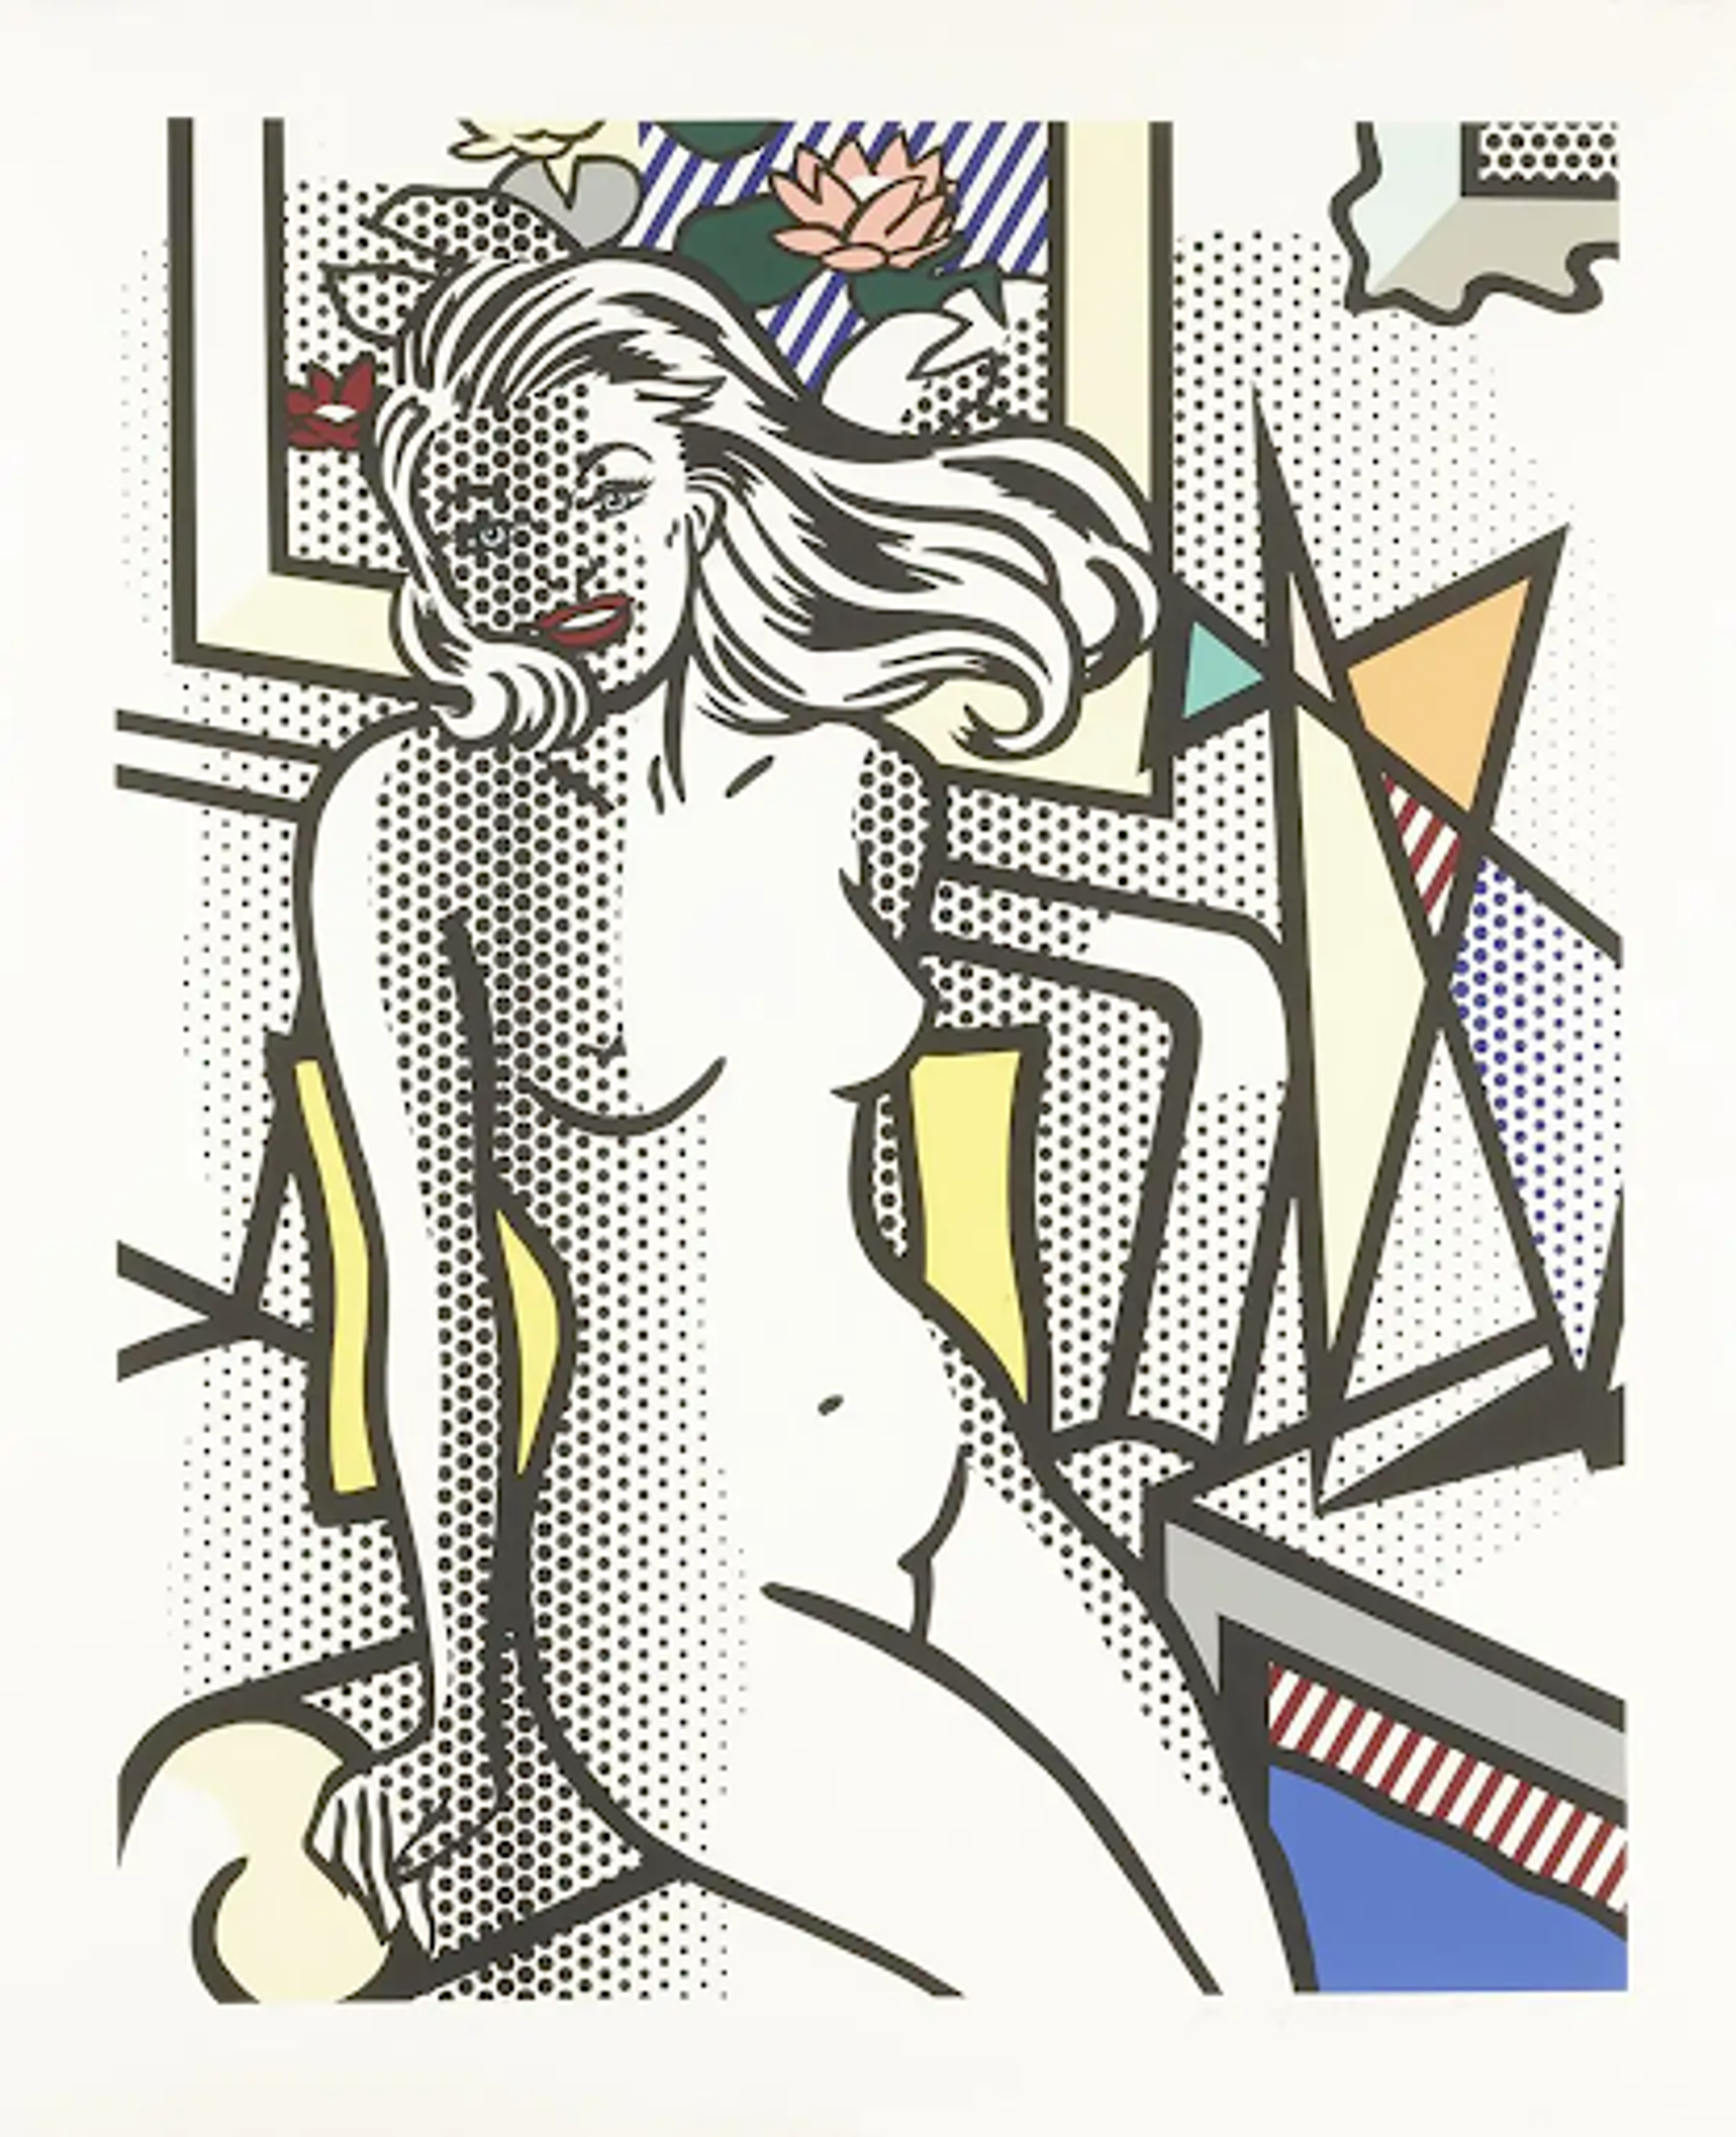 Roy Lichtenstein’s Nude With Yellow Pillow. A Pop Art relief print of a comic style work of a nude woman featured in an interior setting. 